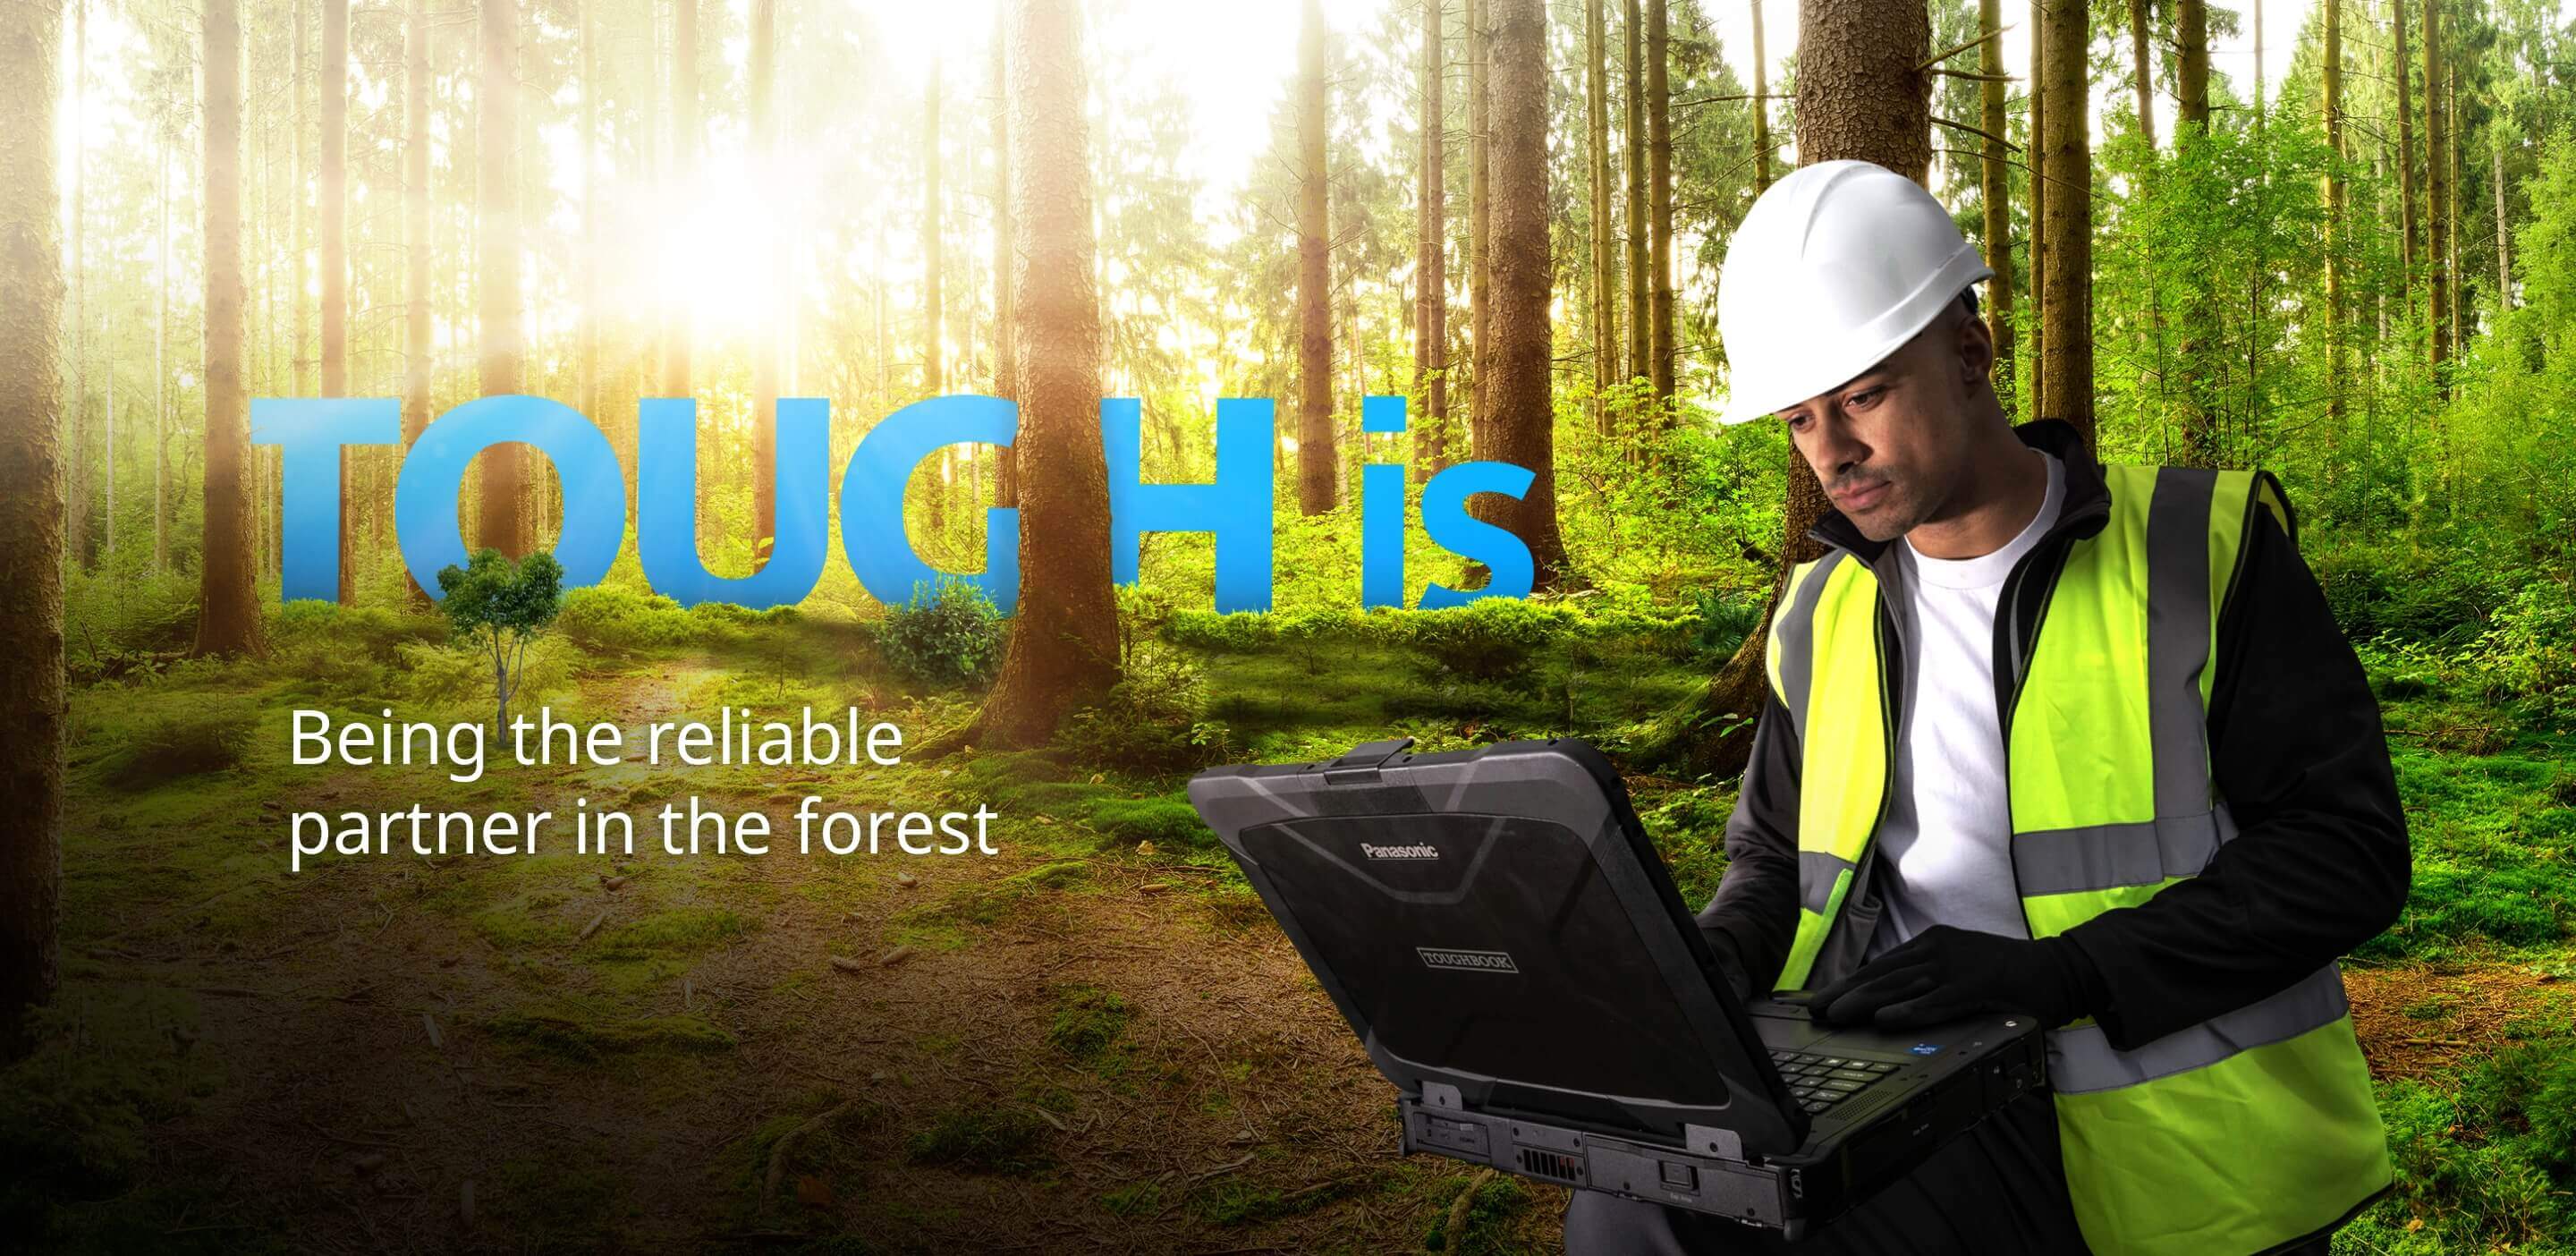 TOUGH IS being the reliable partner in the forest